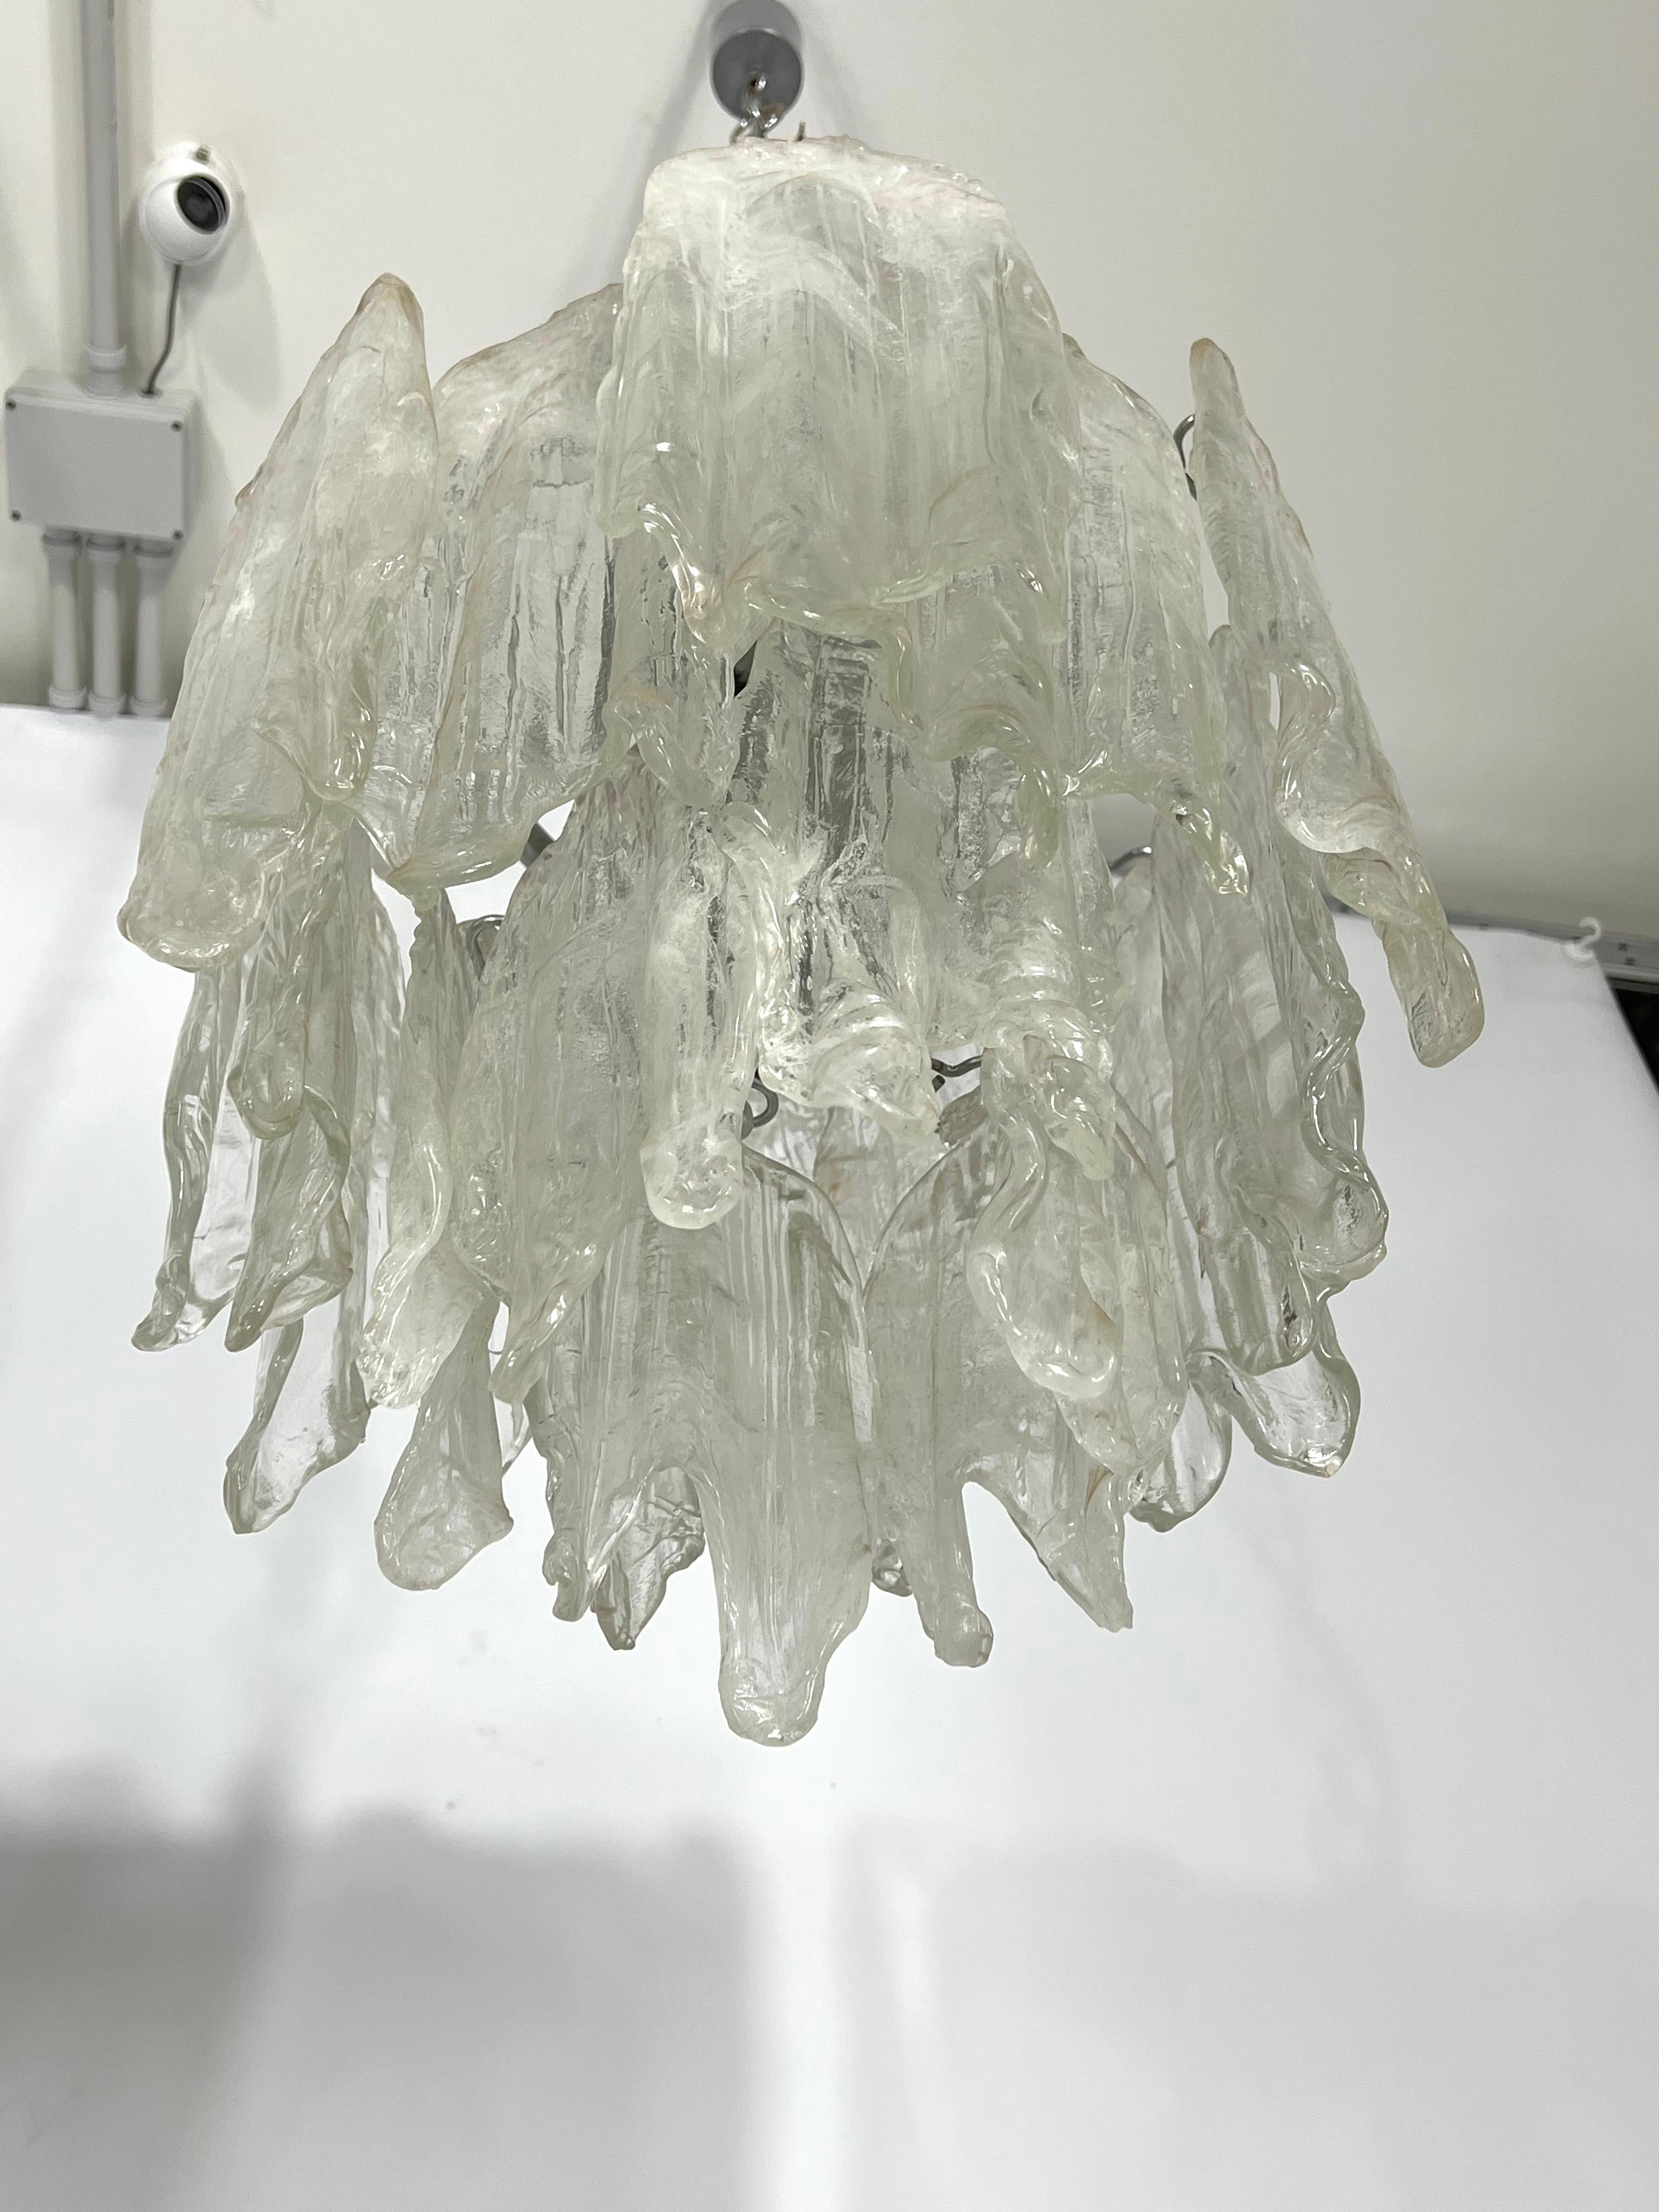 Mazzega Ice glass, pair of vintage murano chandeliers from 70s For Sale 1